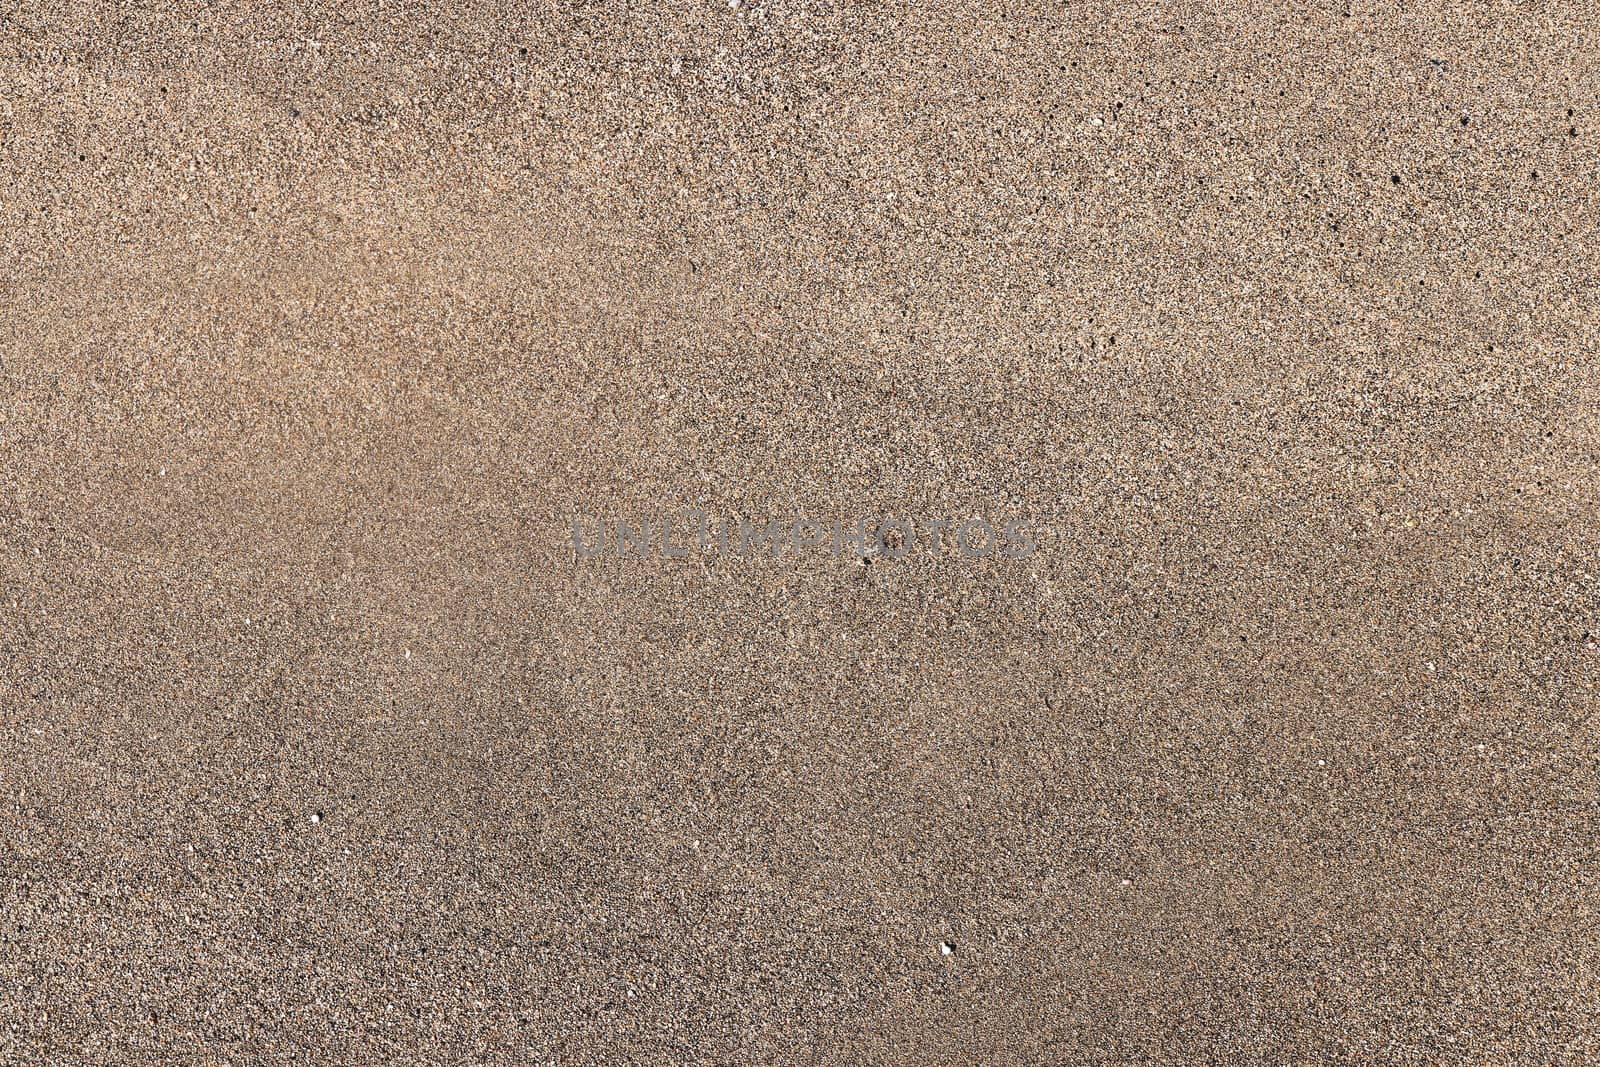 Sea Beach Sand Texture. Outdoor sand background. Sandy Surface B by sanches812